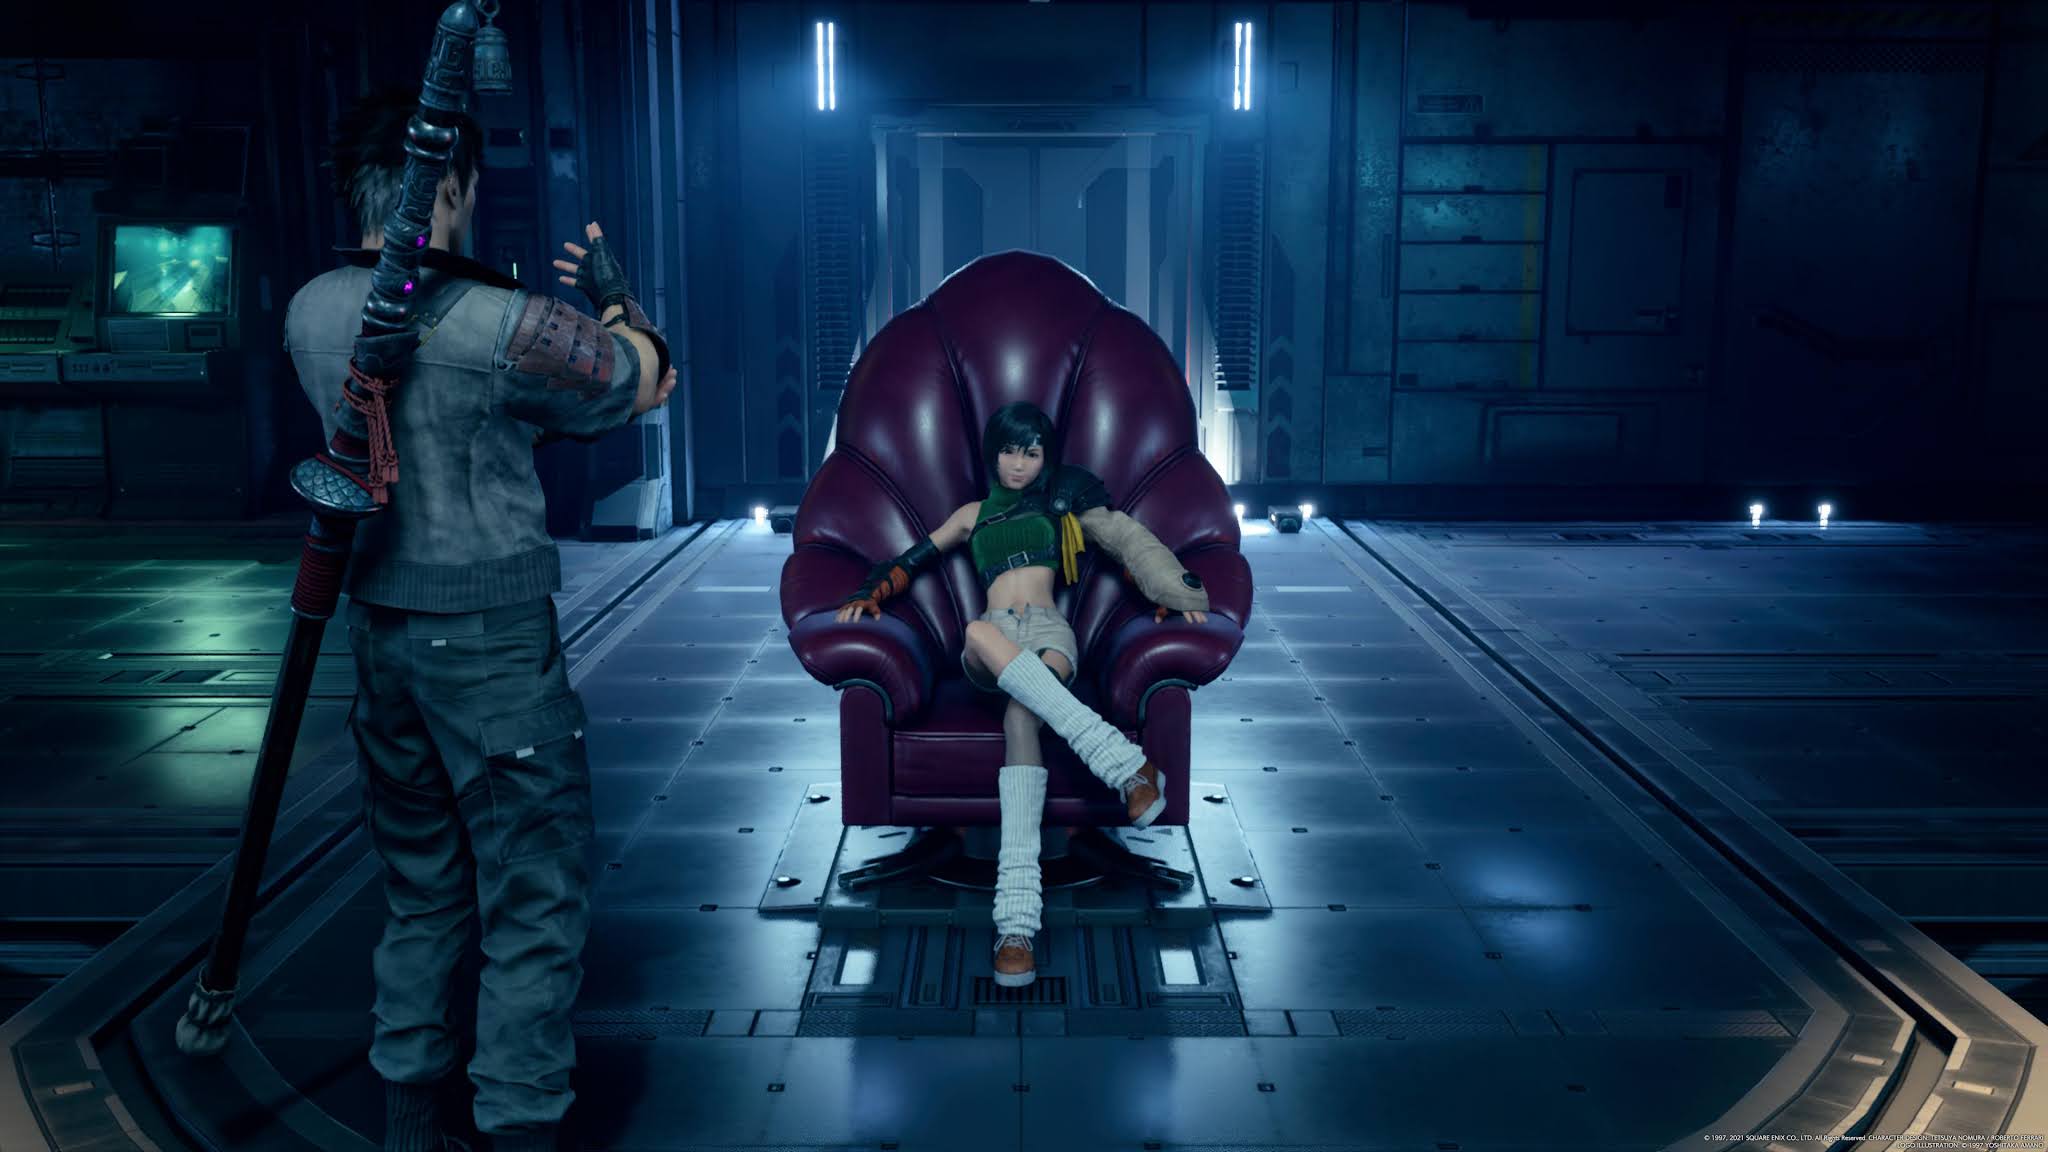 Final Fantasy 7 Remake Part 2 Is In Active Development Amid The Pandemic -  LRM